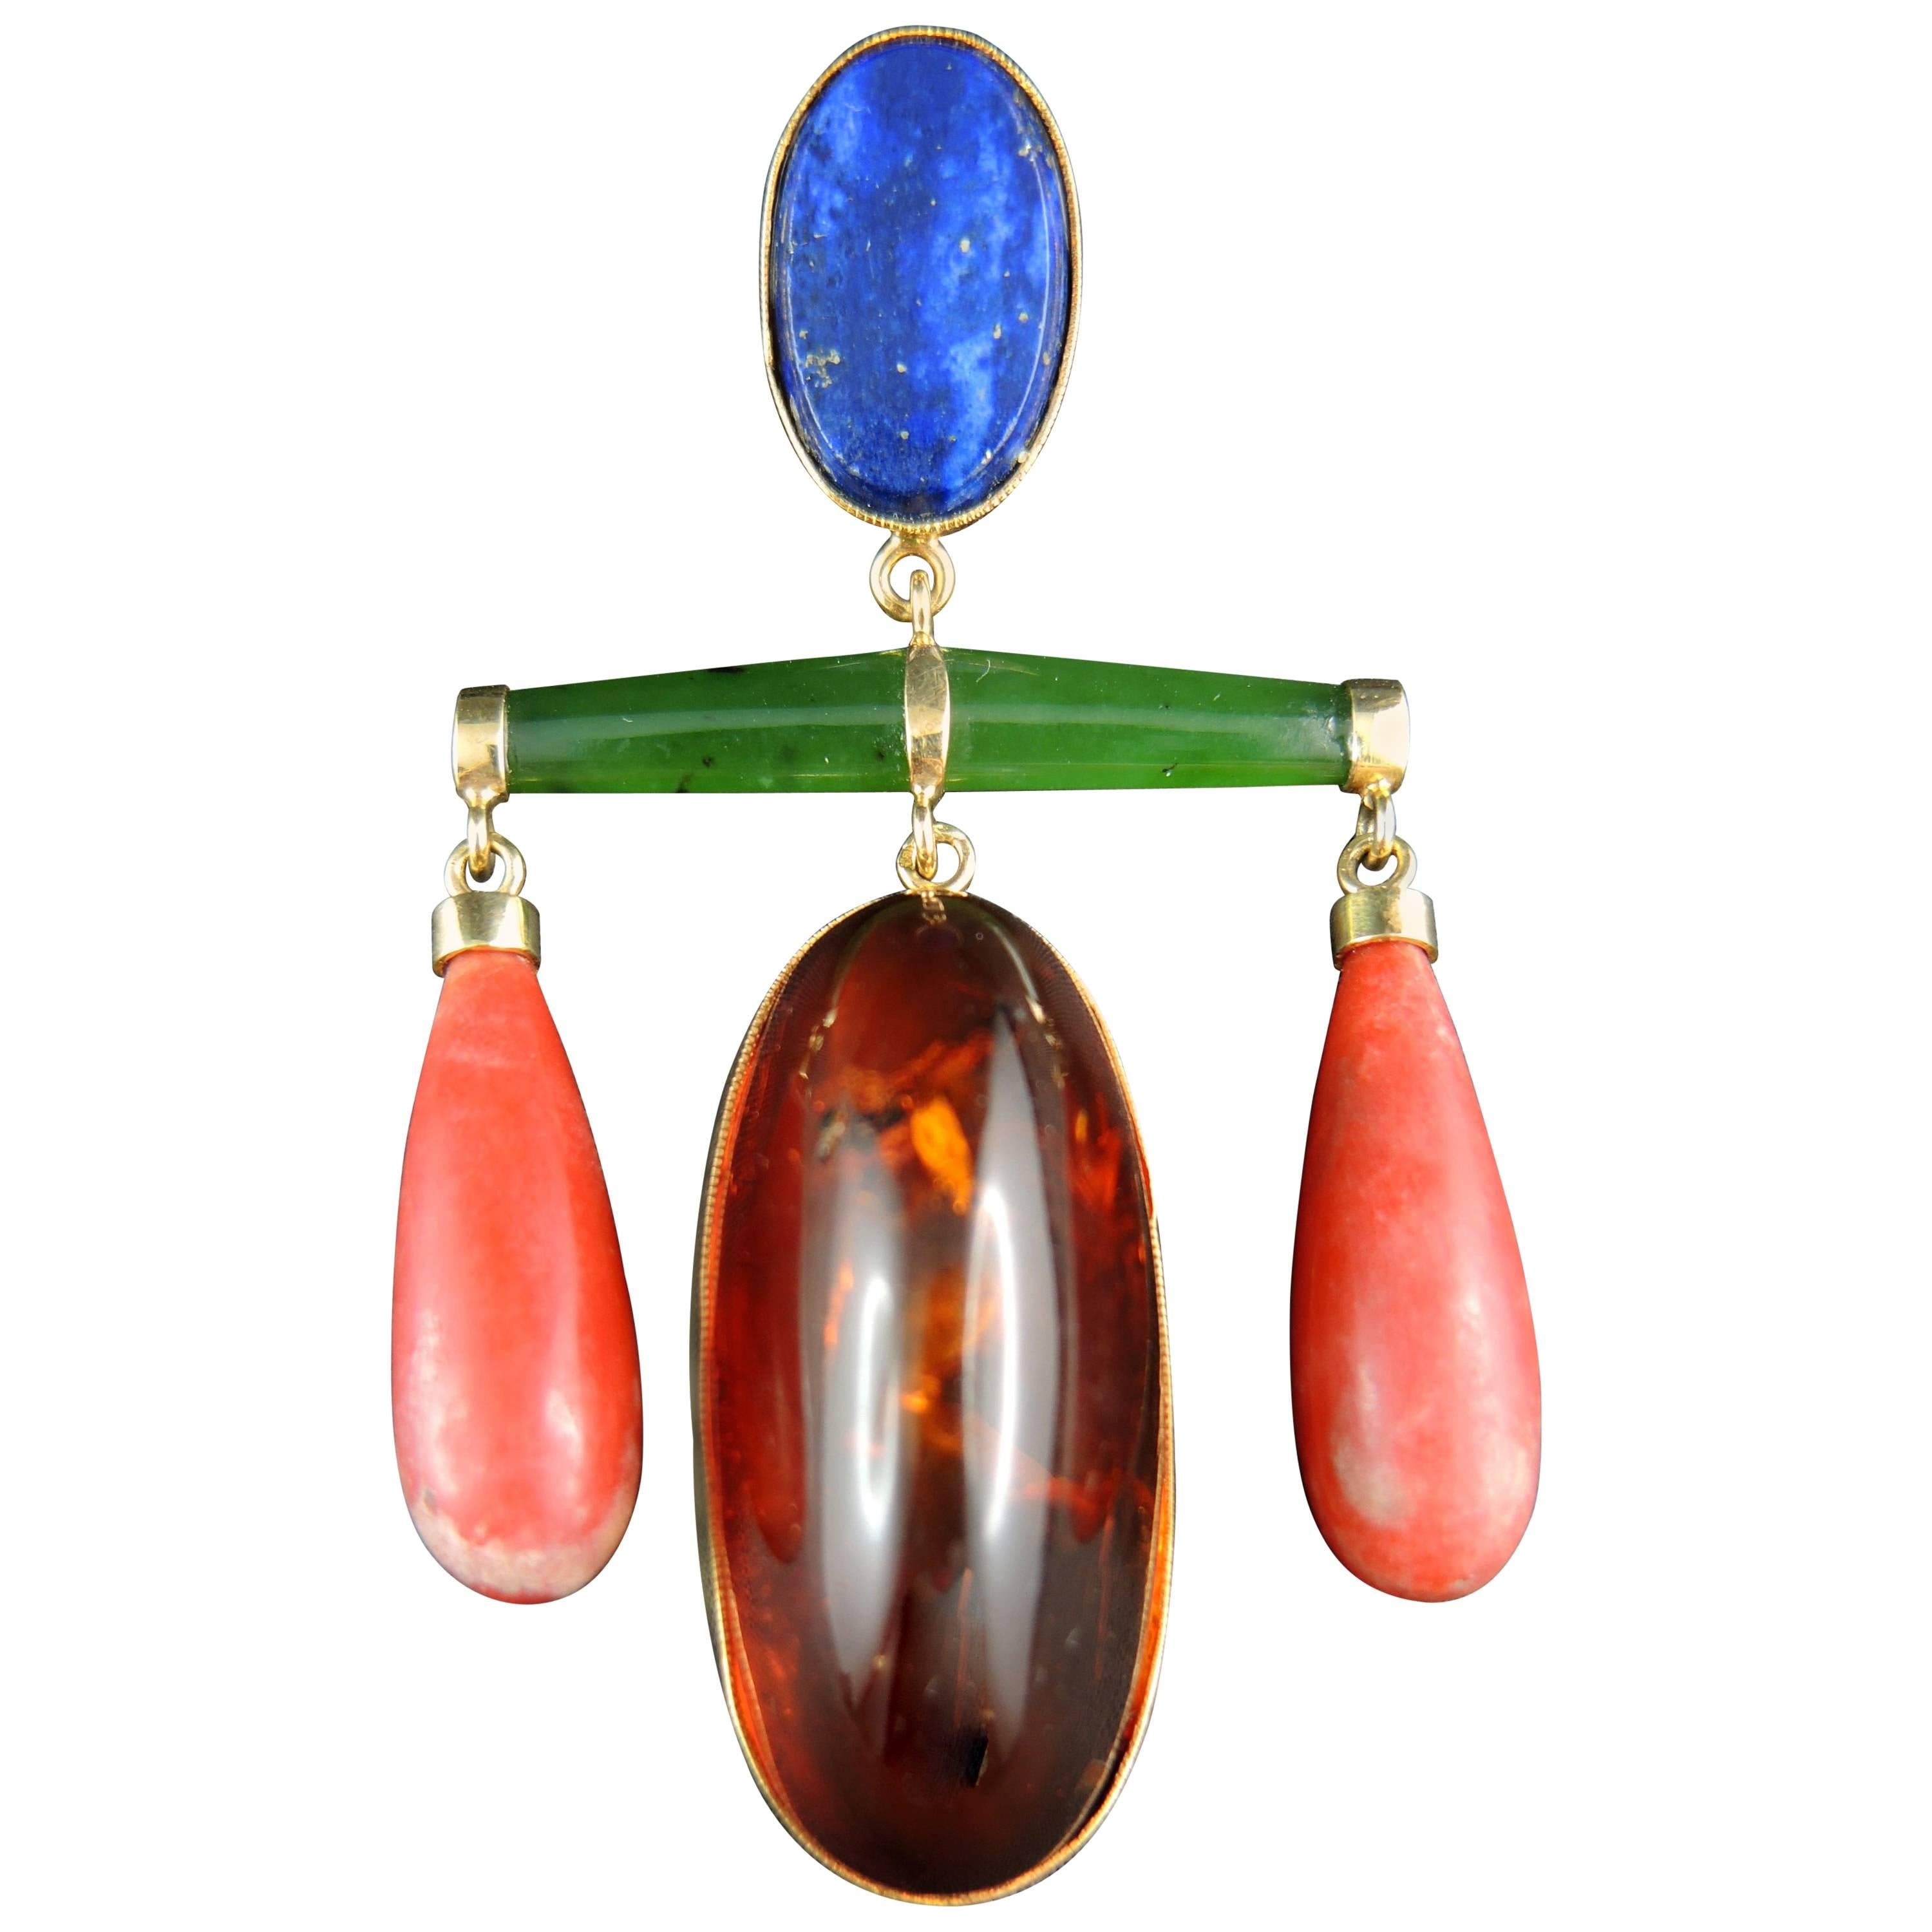 French Modernist Pendant with Lapis Lazuli, Amber, Coral and Jade, circa 1960